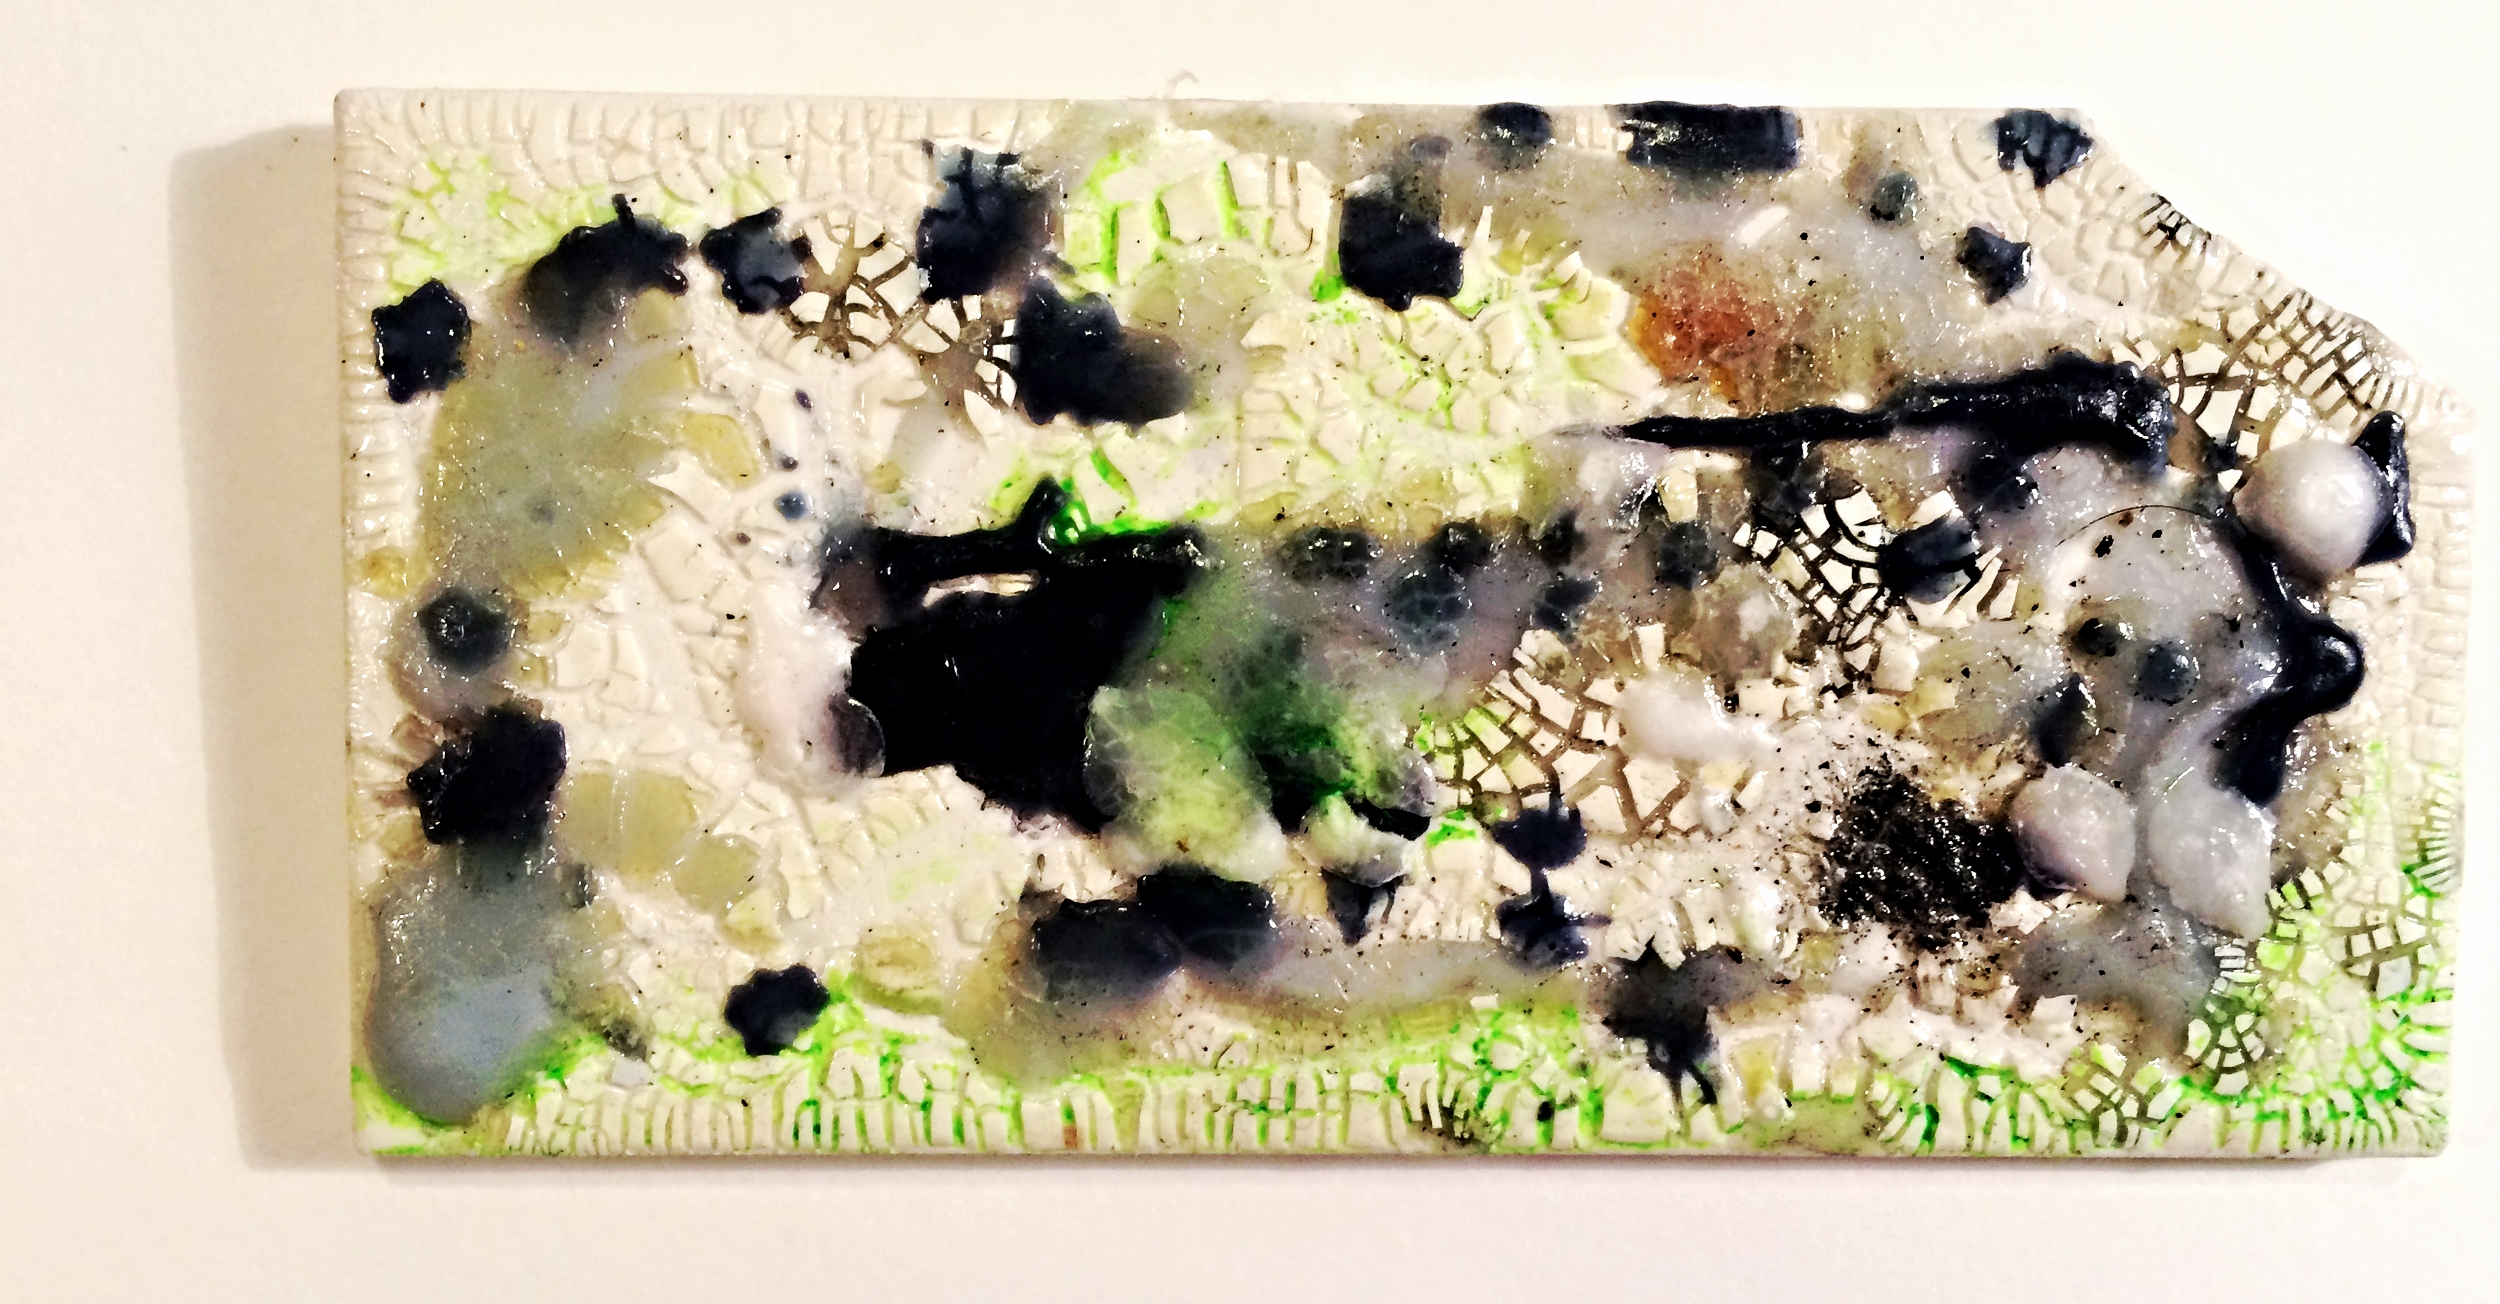   A.S.S.D.D.4974   2016  Acrylic, oil, melted wax and glue on ceramic tile  6 " x 3 " 